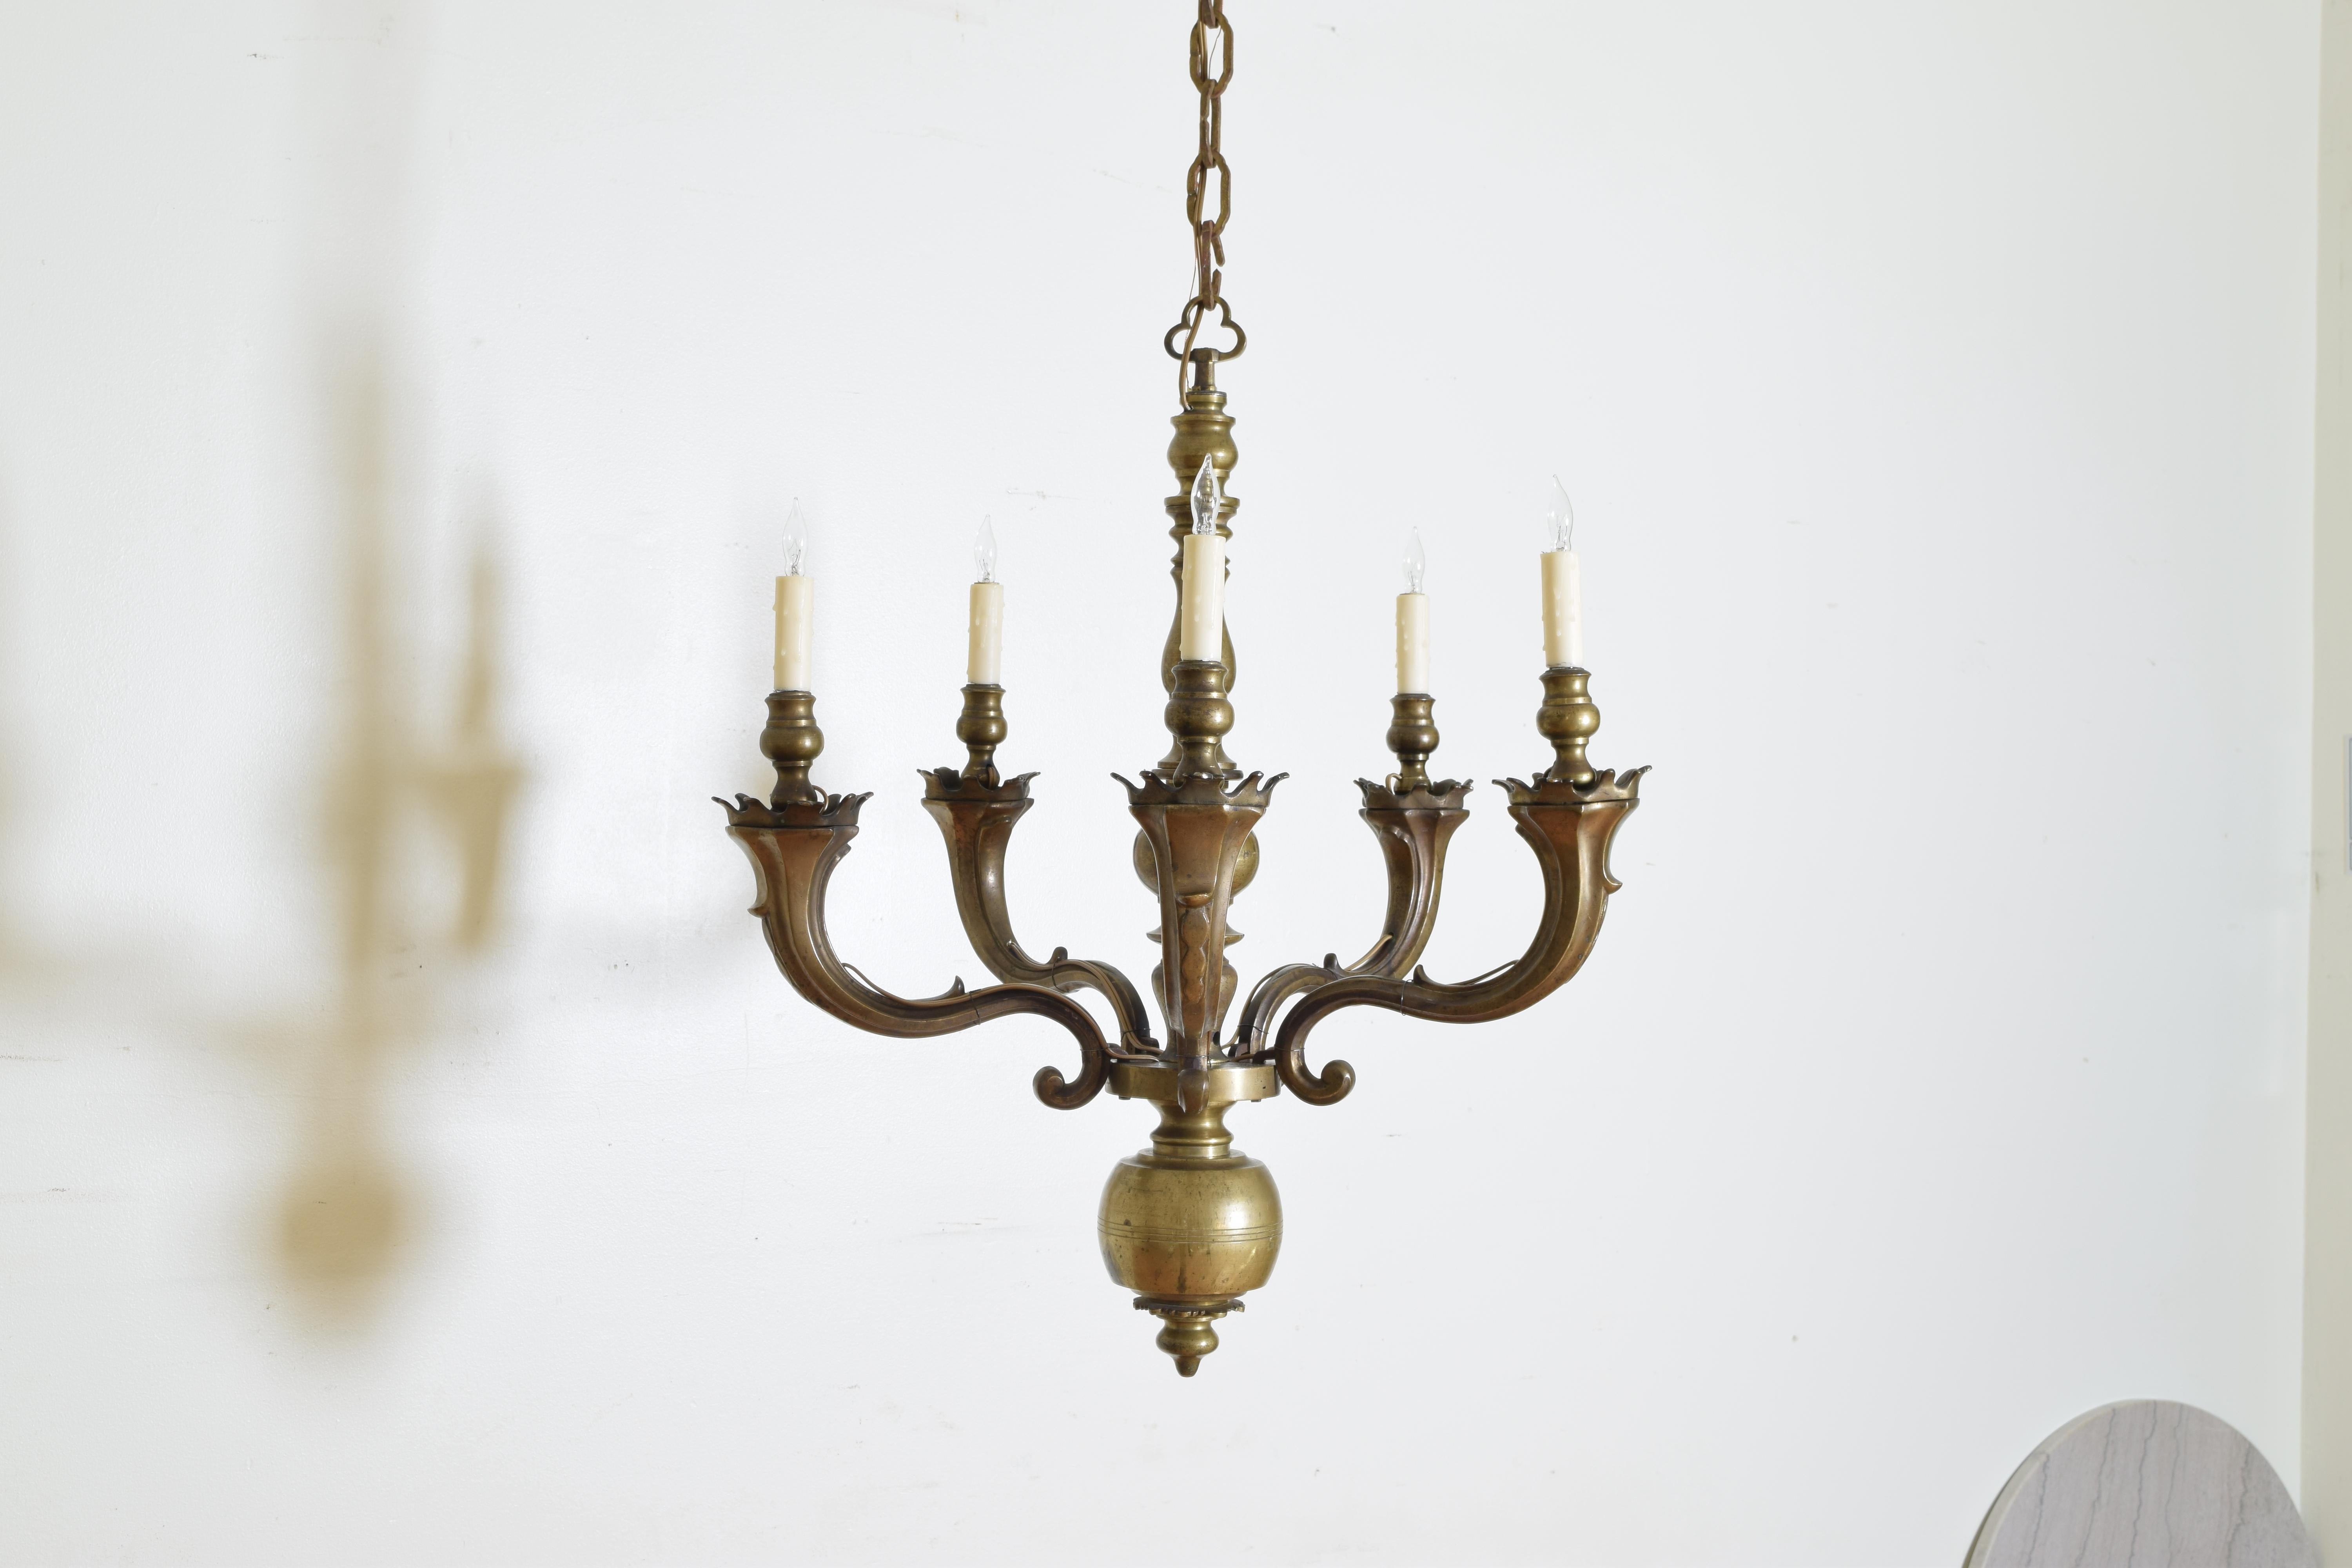 Continental Bronze 5-Light Chandelier, 17th Century or Earlier, Now UL Wired (Barock)